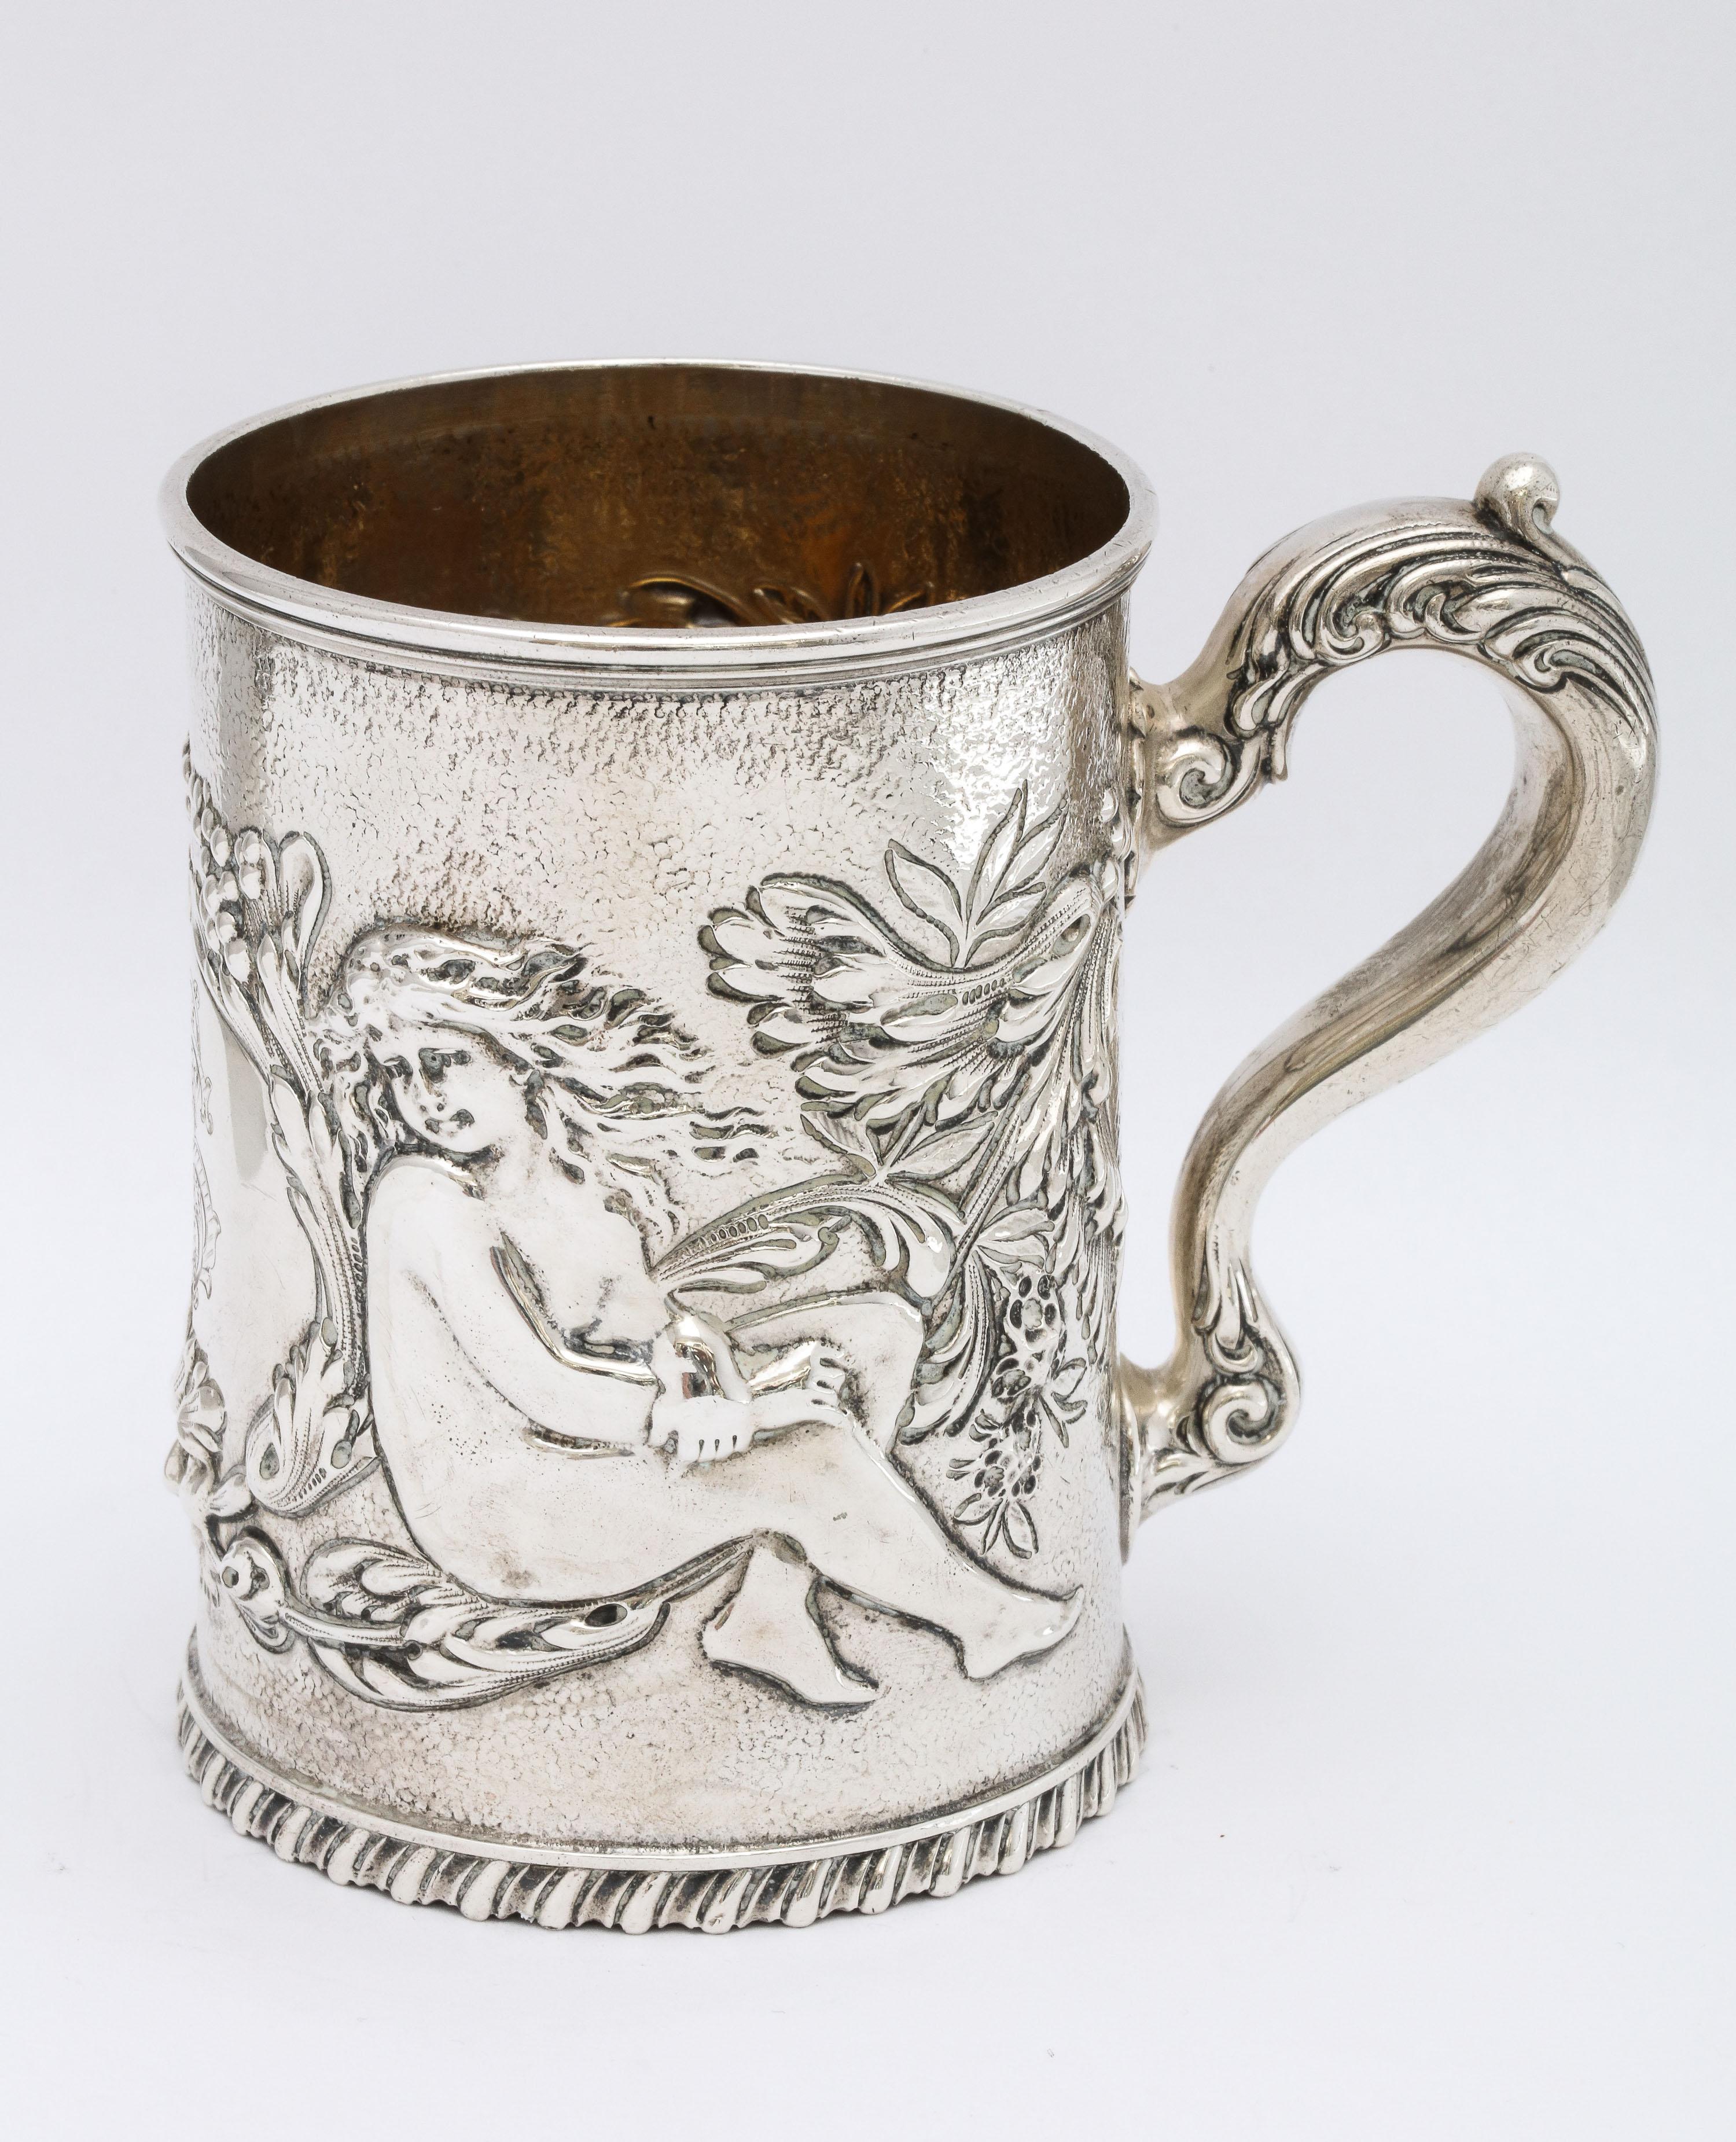 Neoclassical, sterling silver mug/cup, Providence, Rhode Island, Ca. 1880's, Whiting Mfg. Co. - maker. Measures almost 4 inches high x 4 1/2 inches wide from edge of handle to outer edge of rim of cup x 3 inches diameter of opening. Gilded interior.